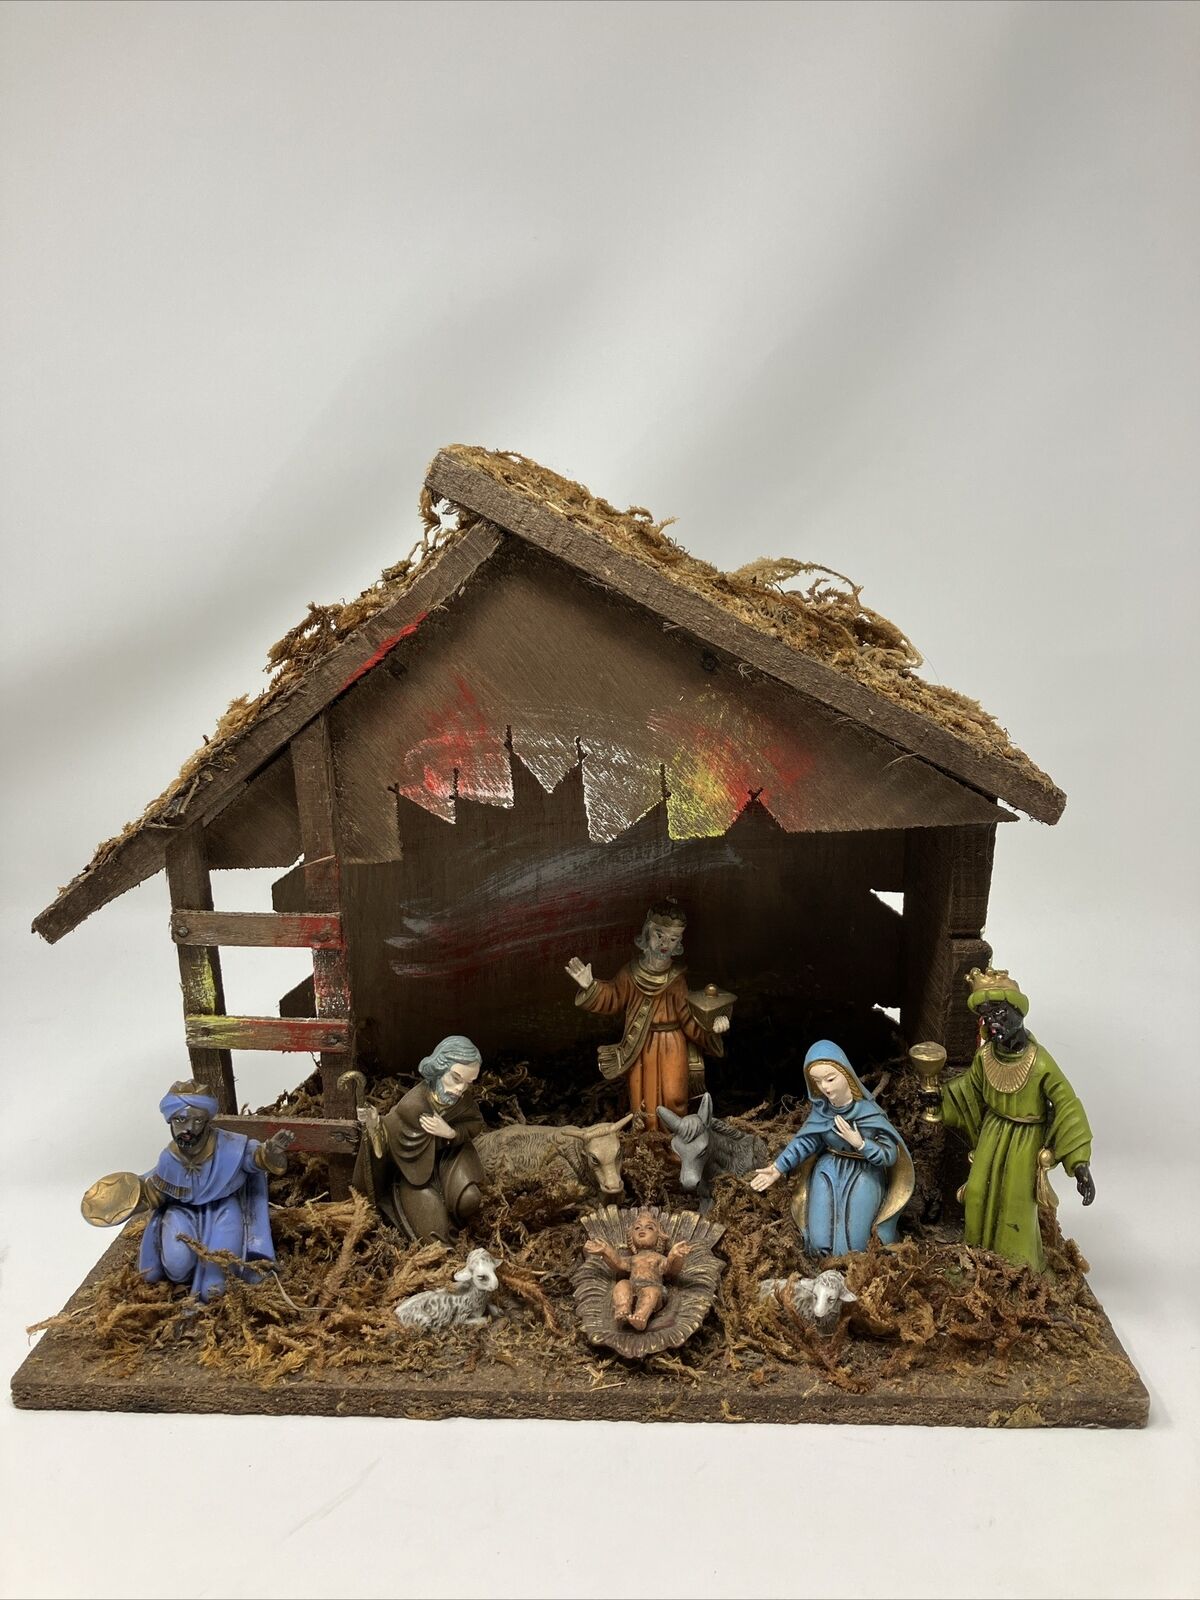 ITALY Vintage Christmas Nativity Scene Crèche Wood Stable Straw Roof